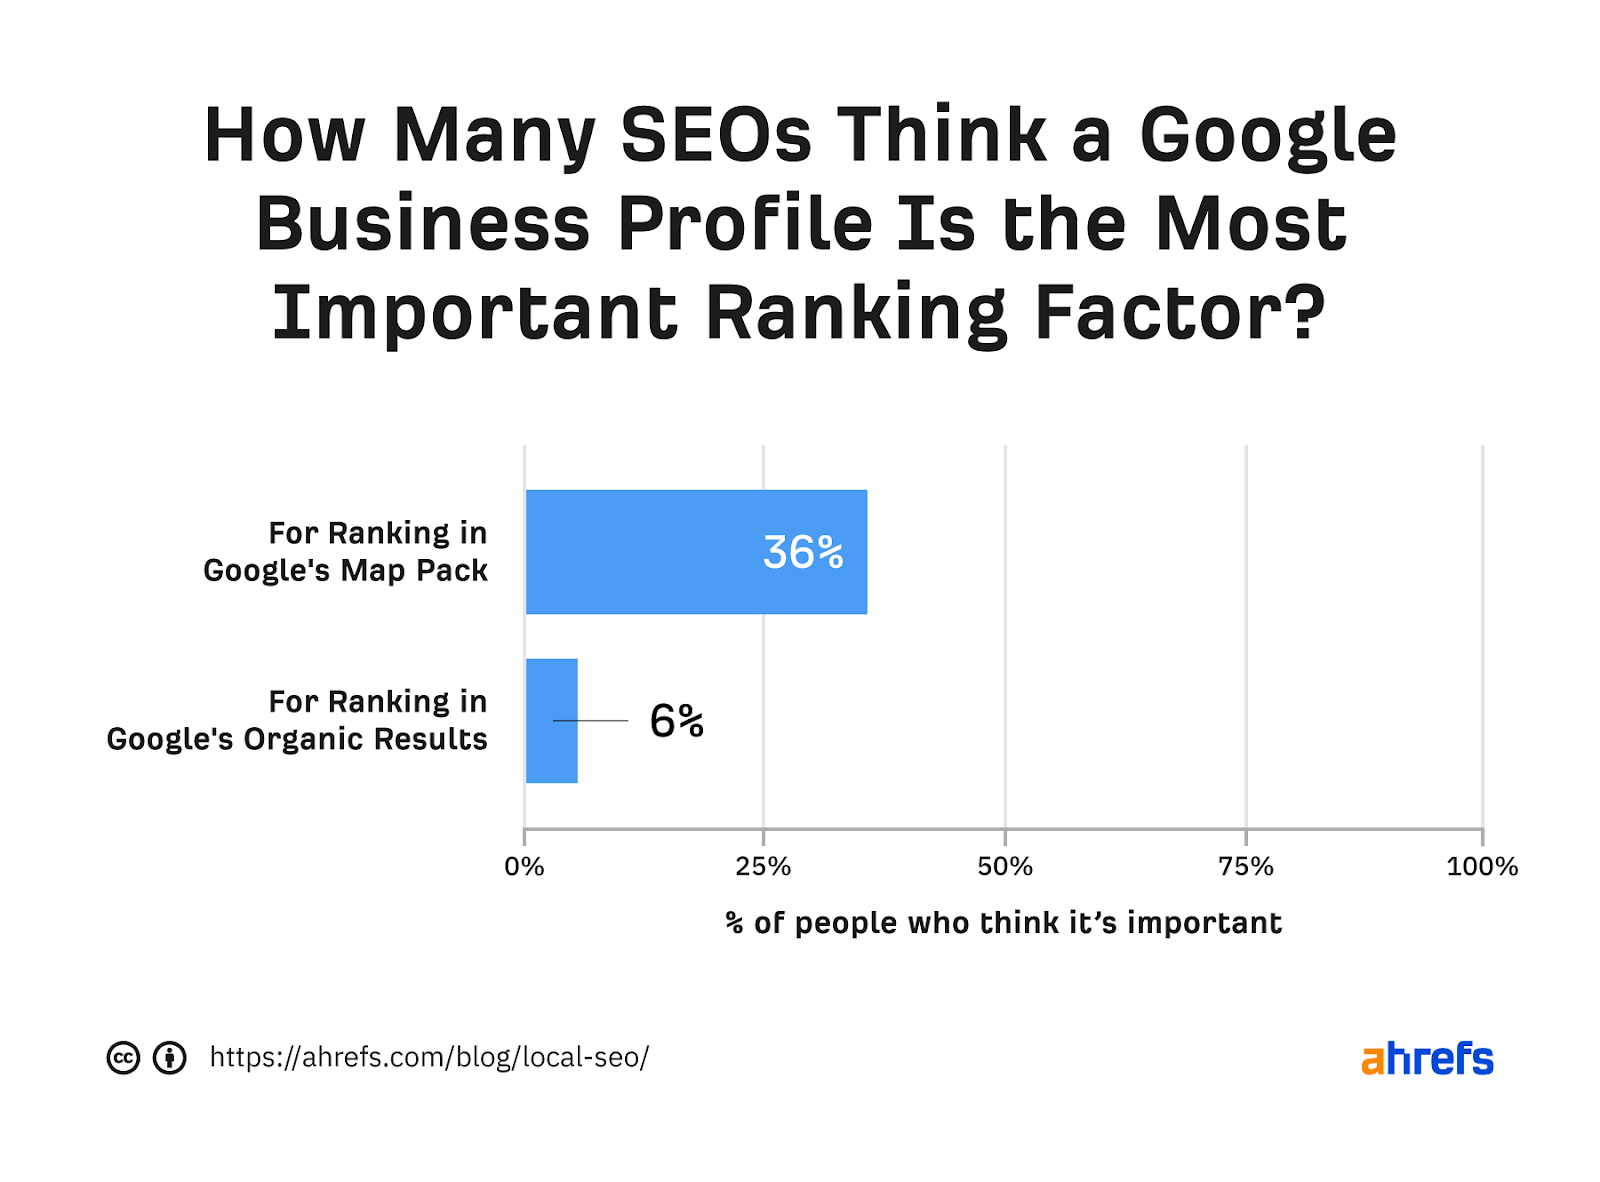 Bar graph showing percentage of SEOs who think GBP is most important ranking factor for "map pack" and "regular" results, respectively